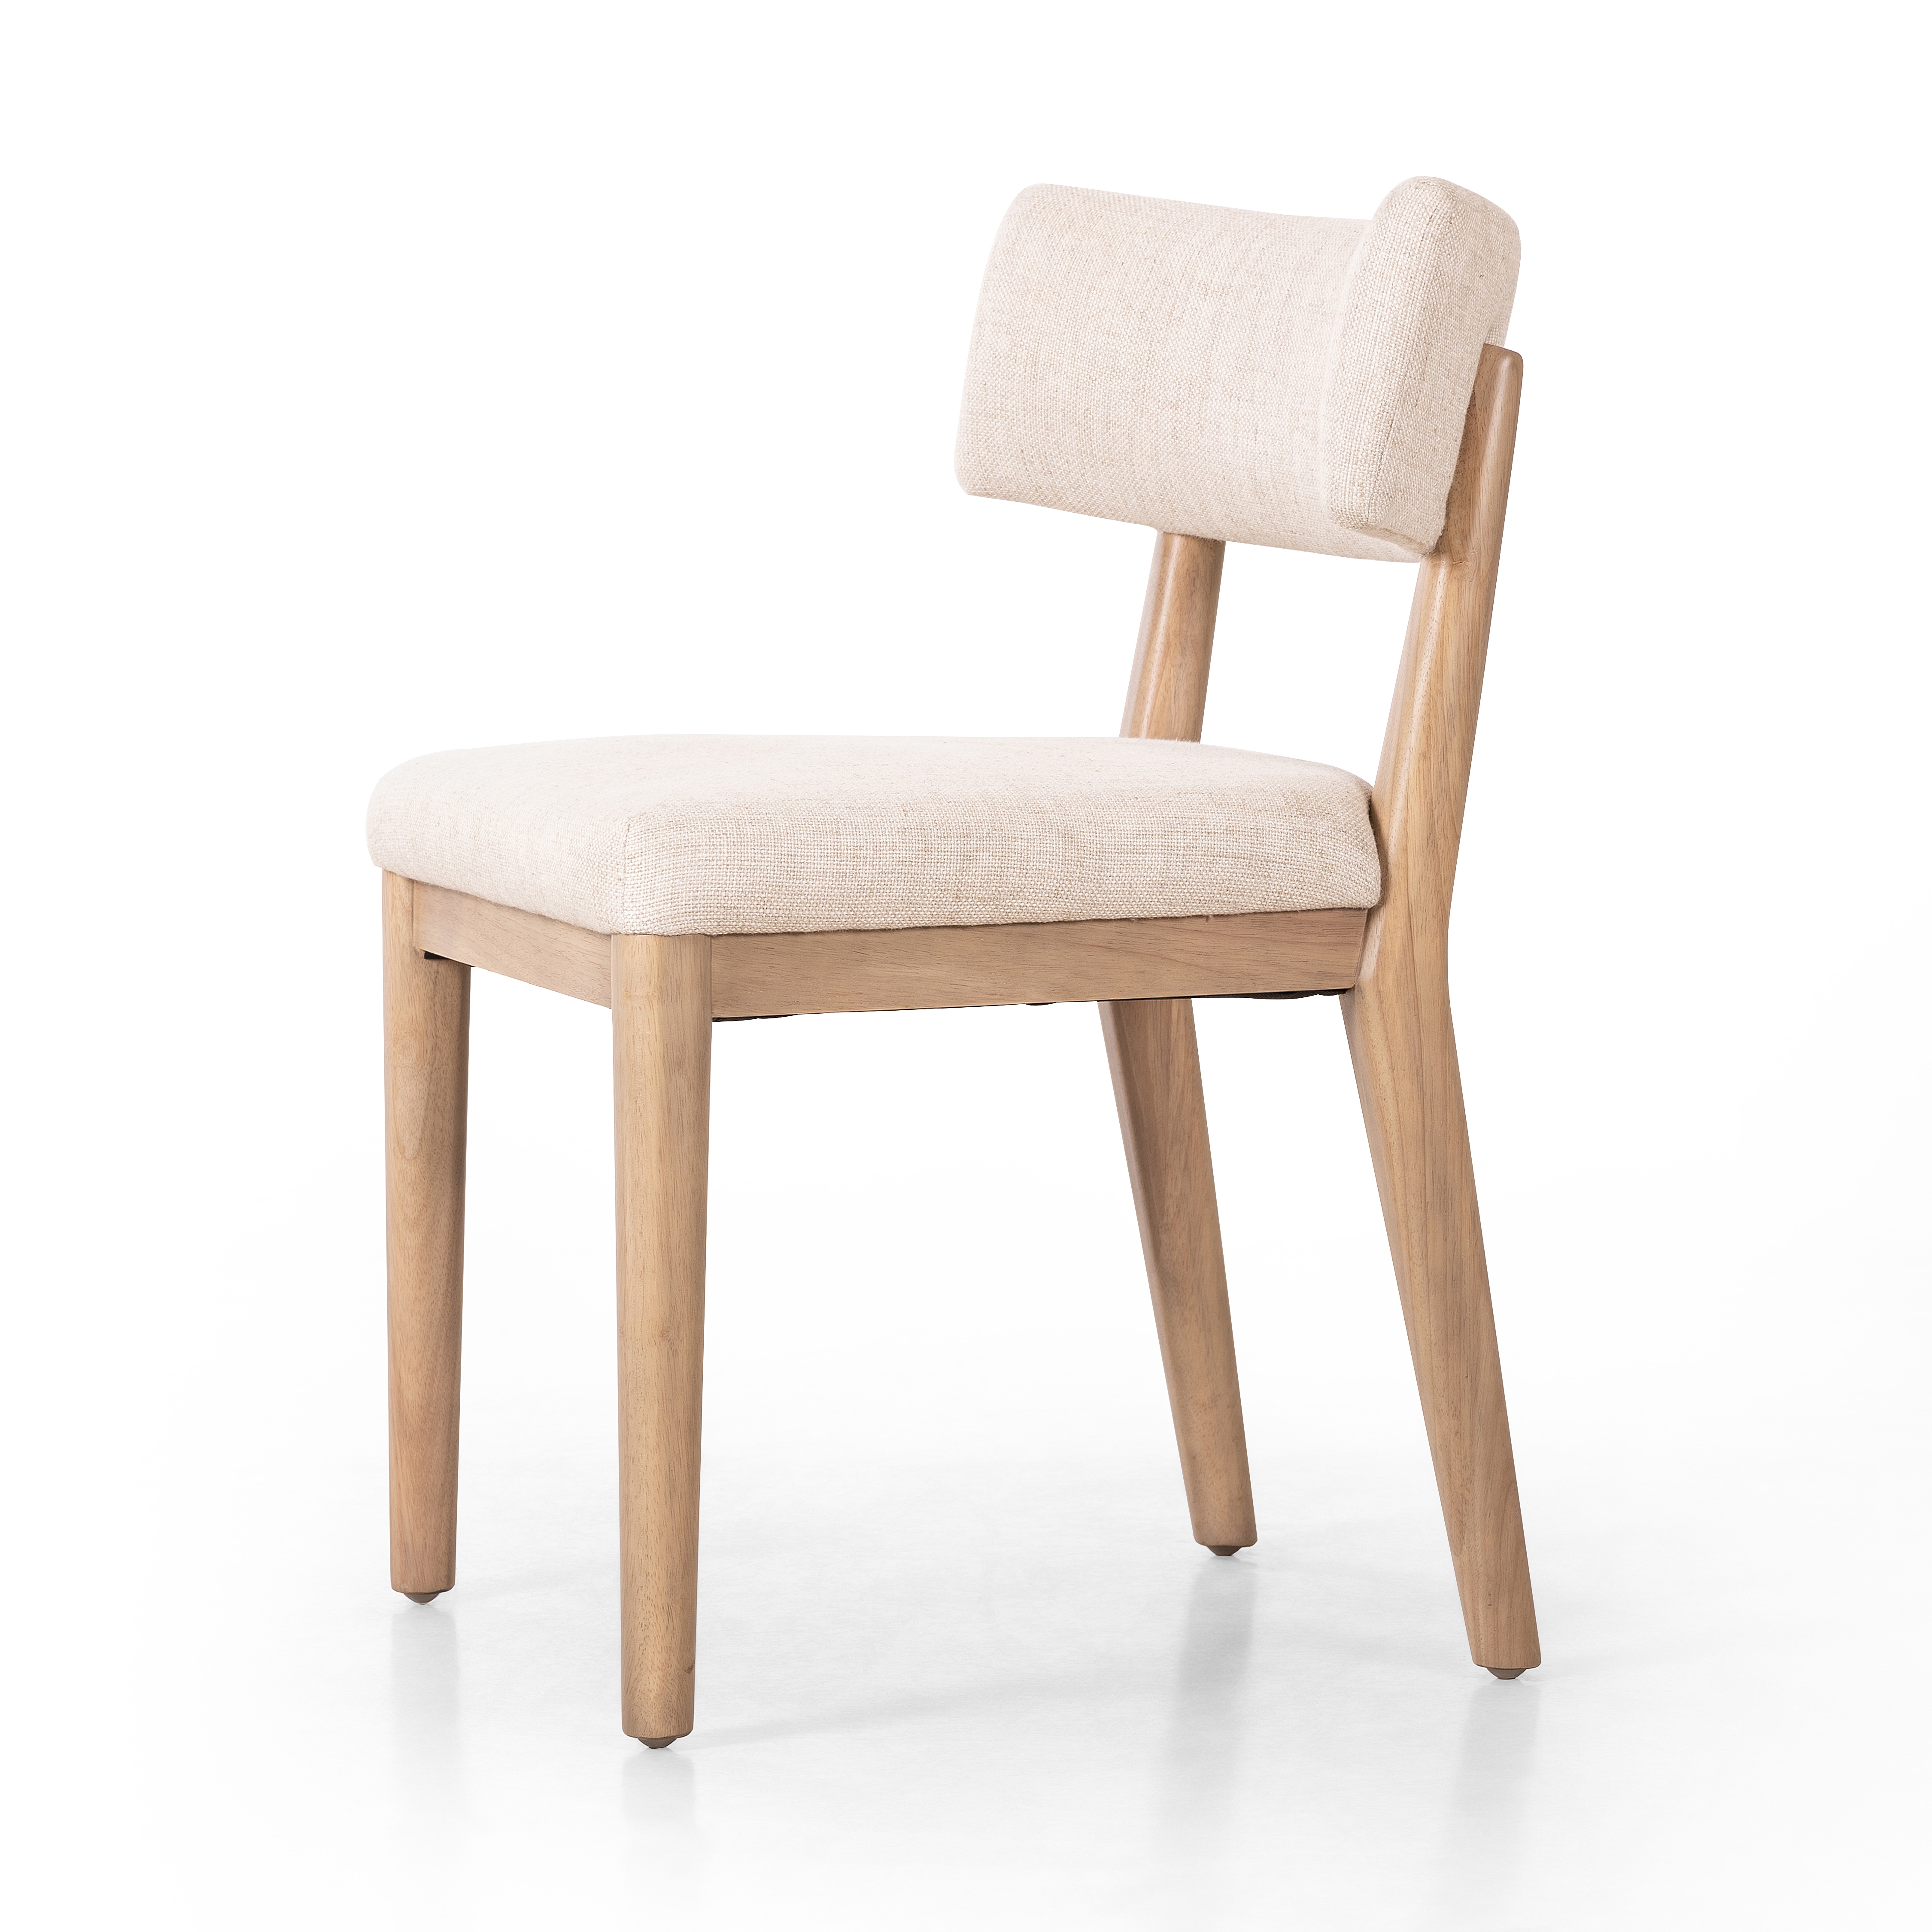 Cardell Dining Chair-Essence Natural - Image 3